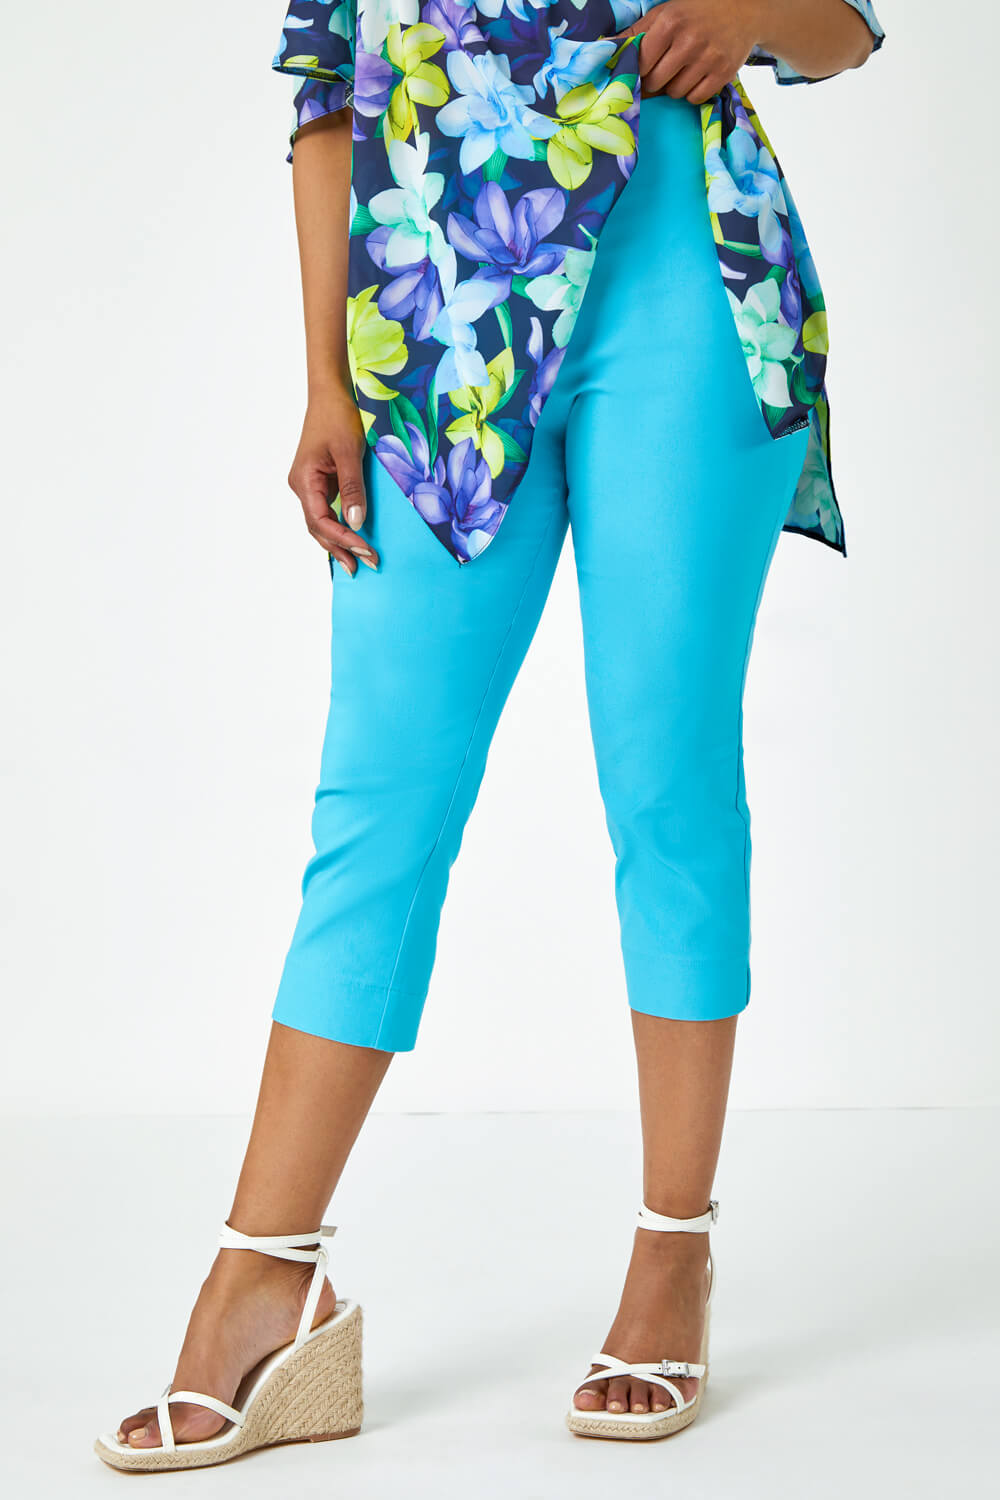 Turquoise Petite Cropped Stretch Trouser, Image 2 of 5